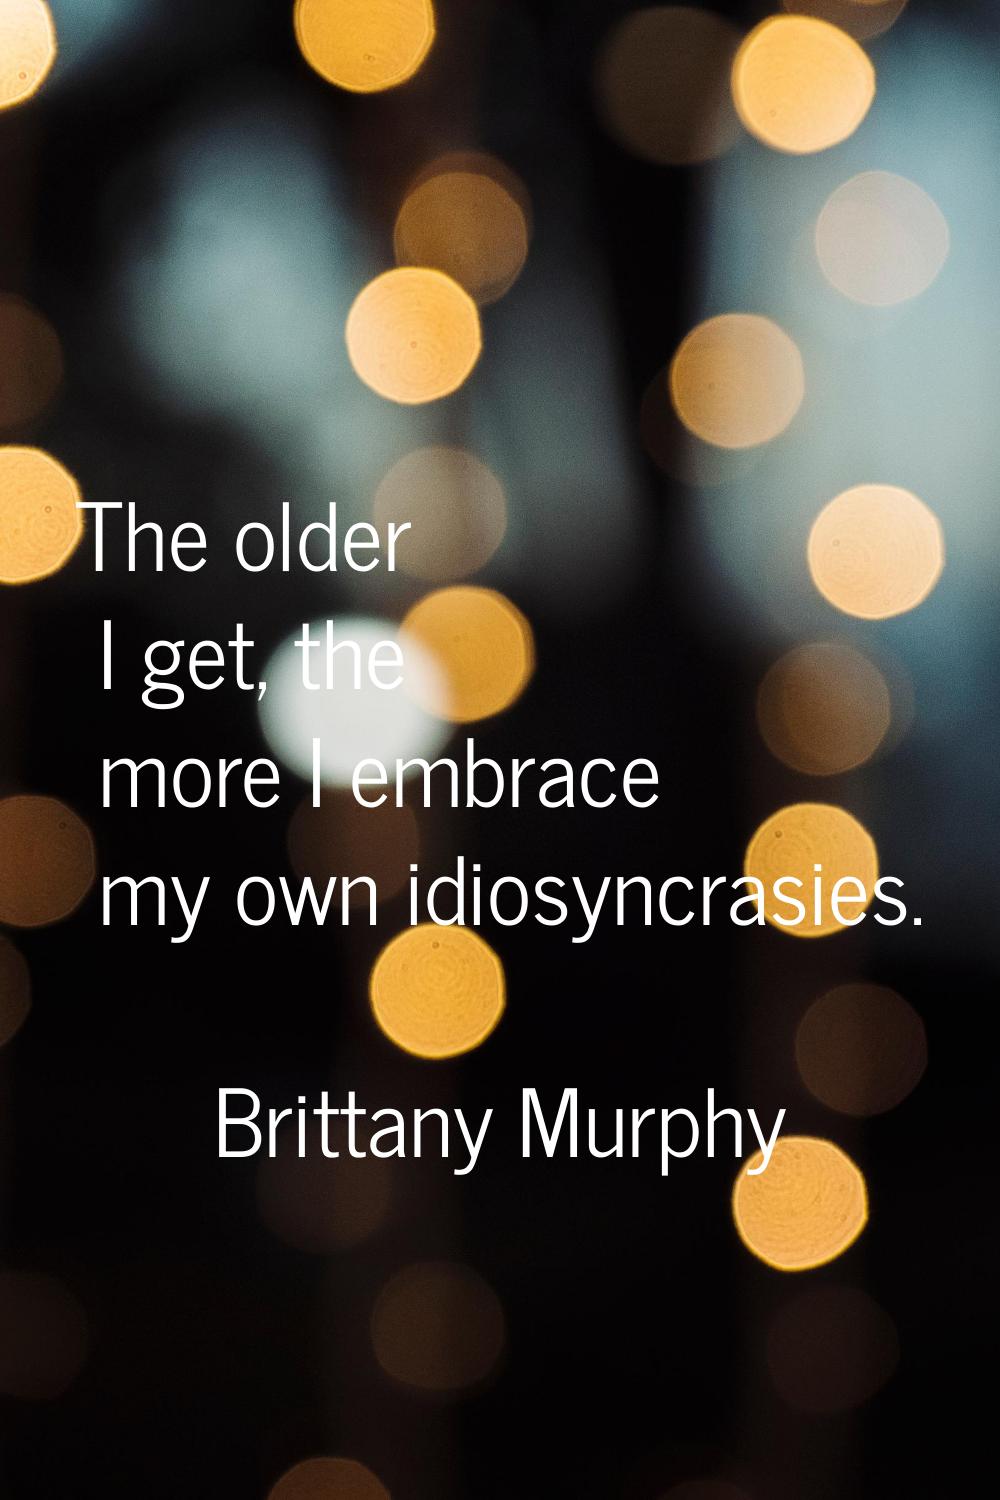 The older I get, the more I embrace my own idiosyncrasies.